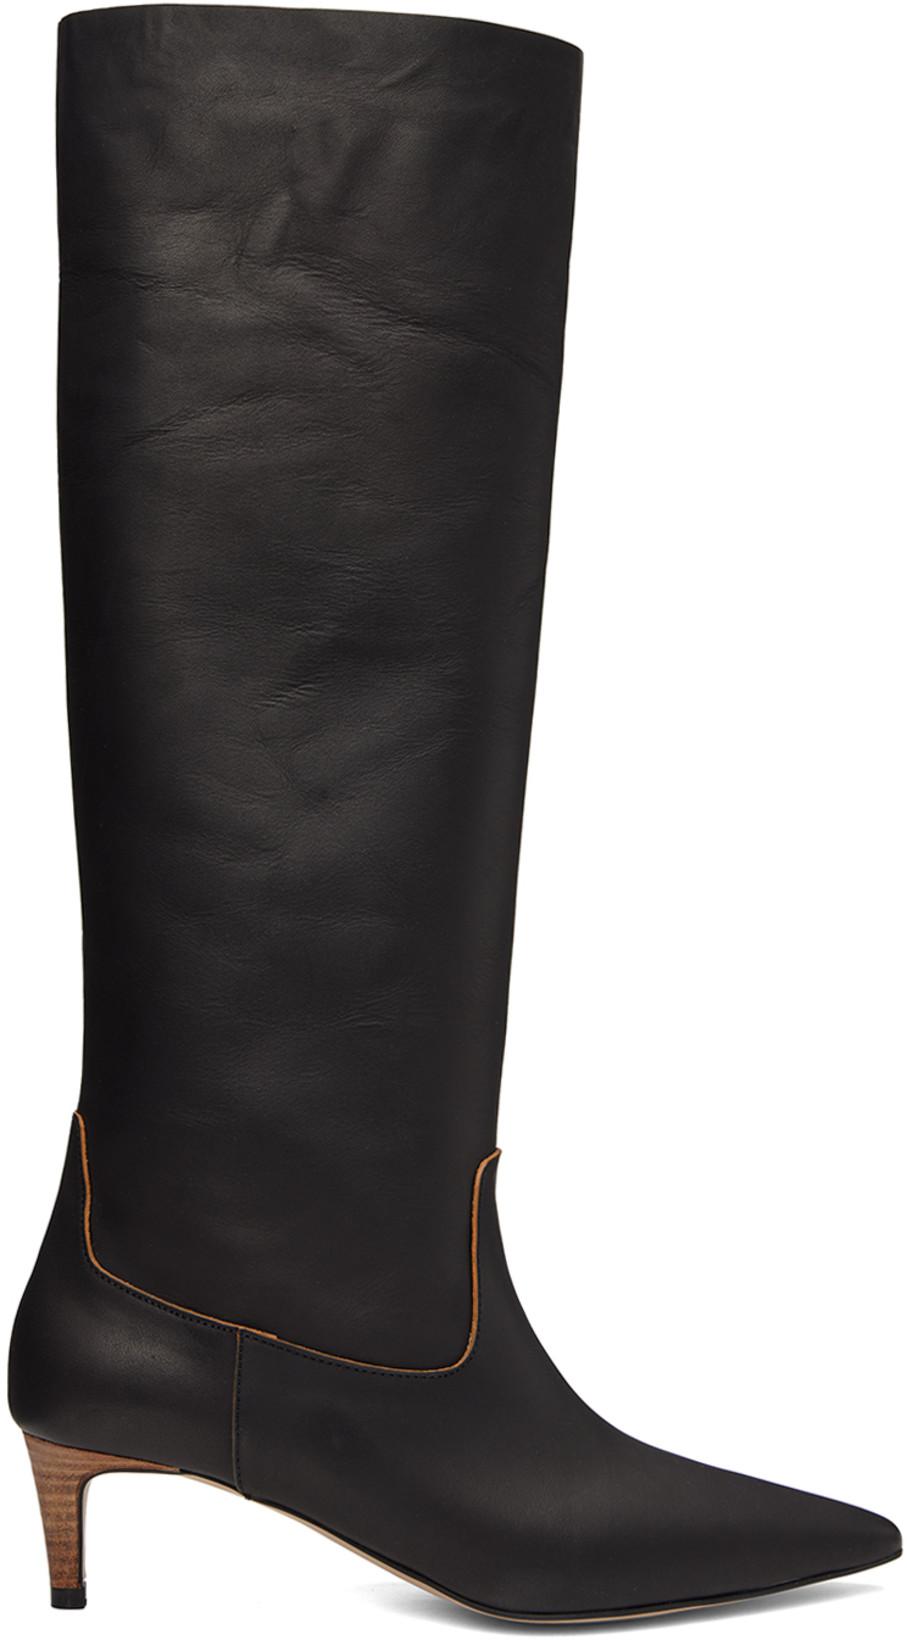 SSENSE Exclusive Black Luxe Western Tall Boots by COMME SE-A